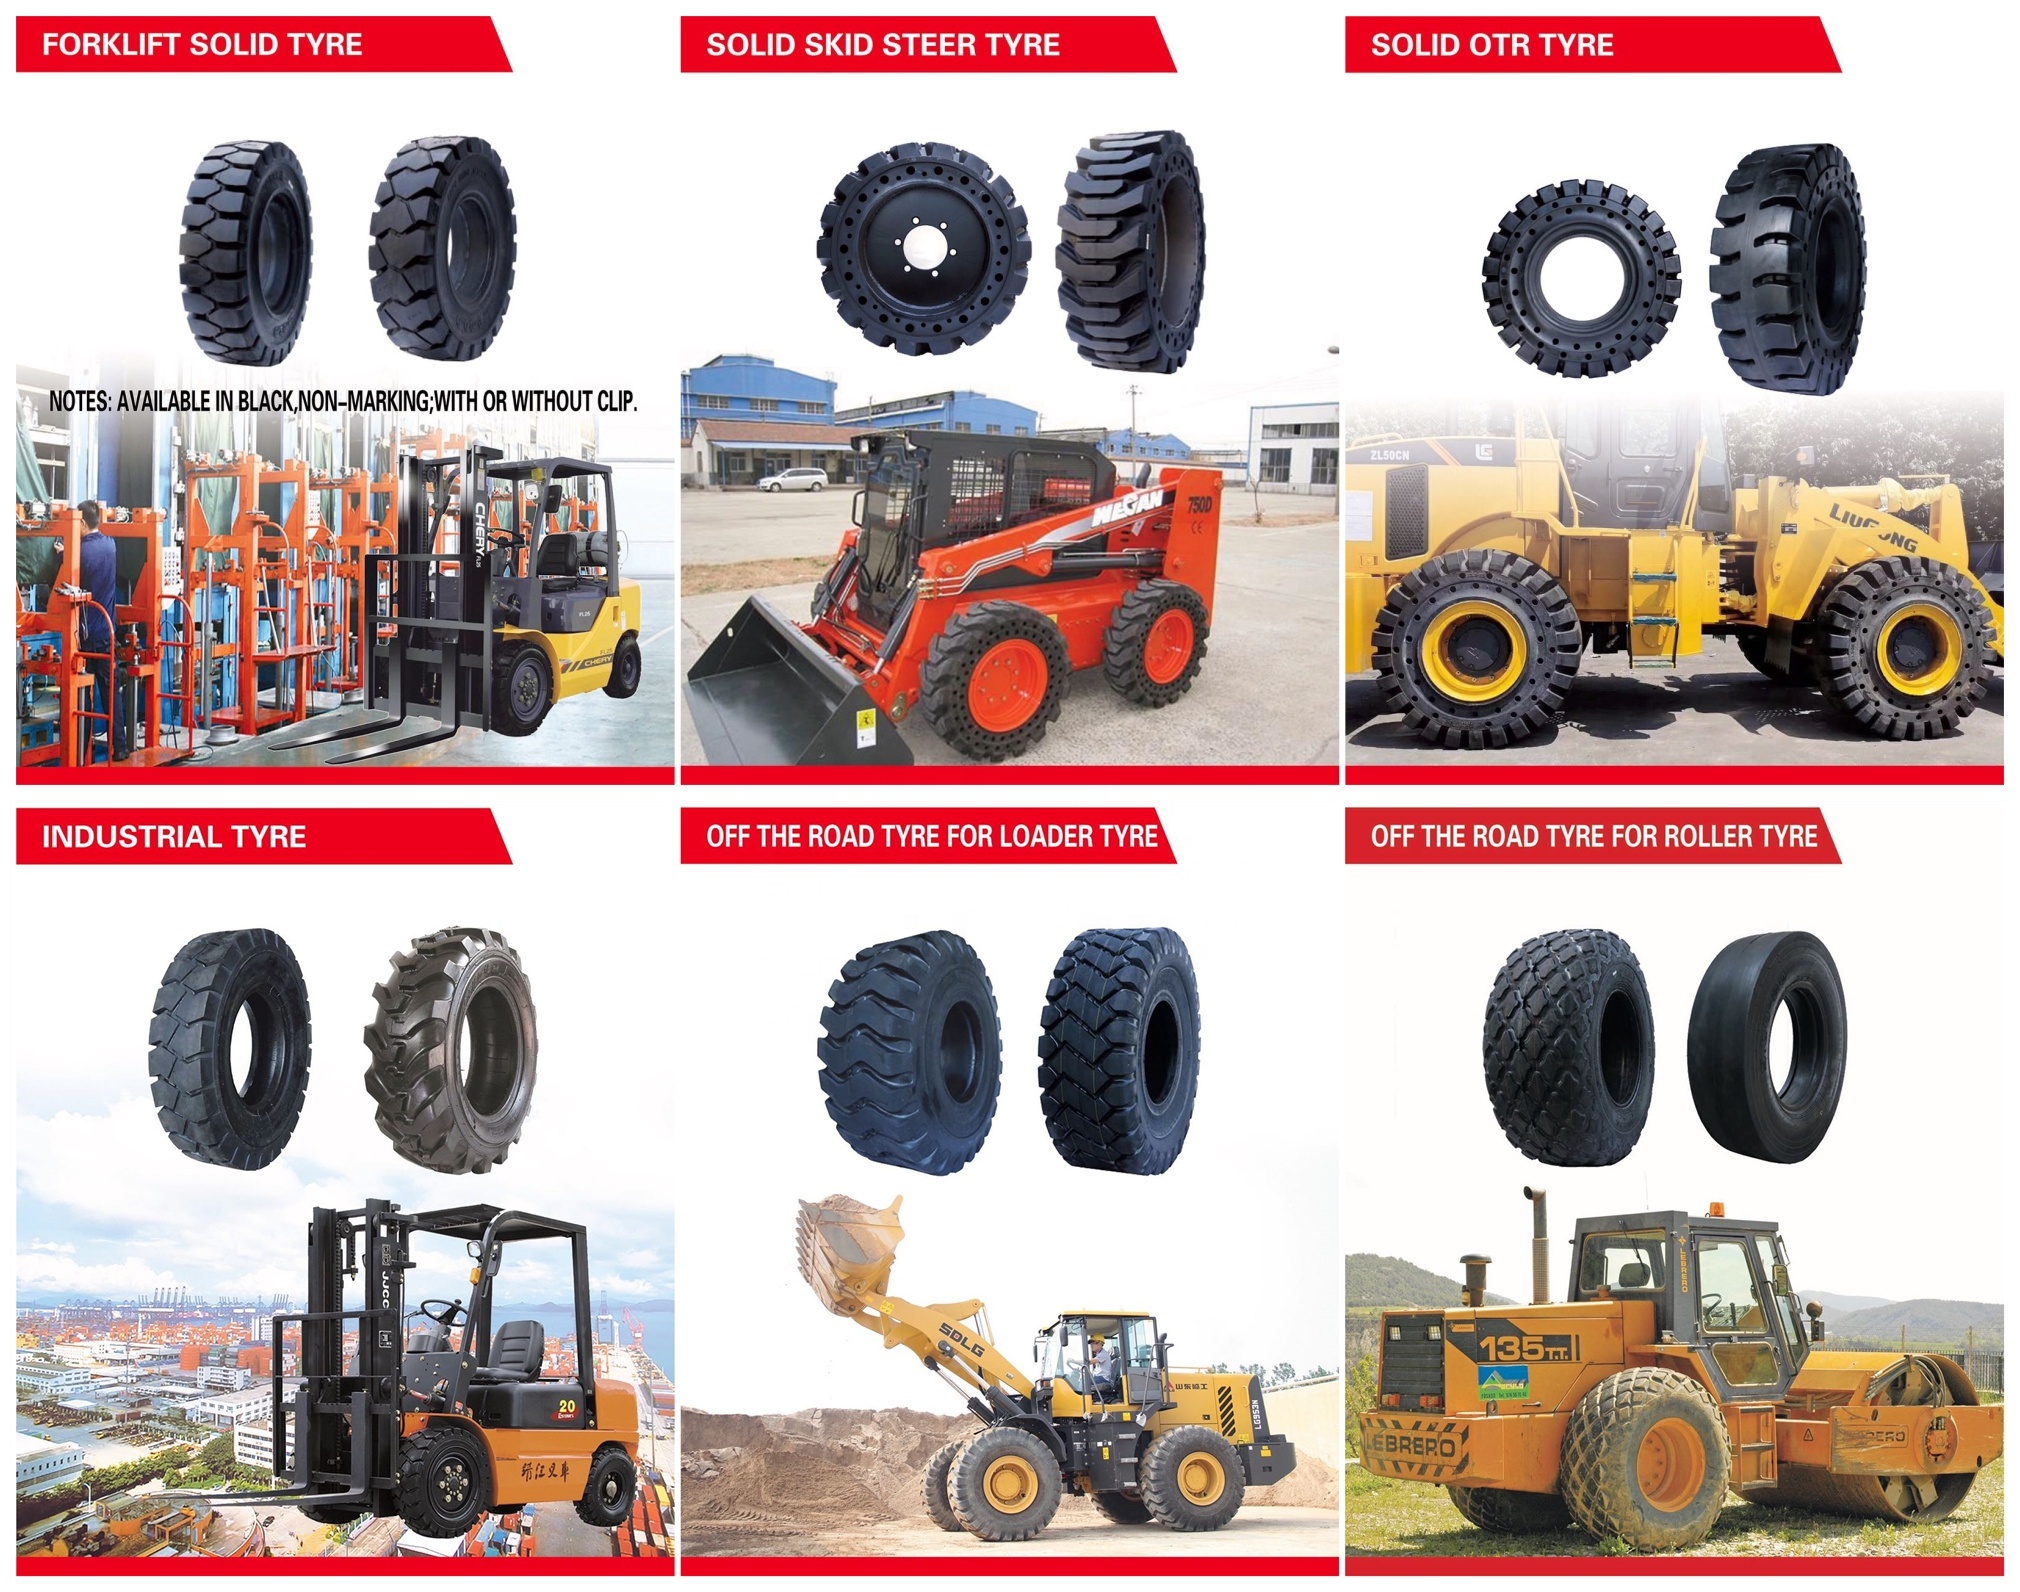 Hot Sale Techleader Forklift Parts 7.00-12 Pneumatic forklift Tire With Rims  